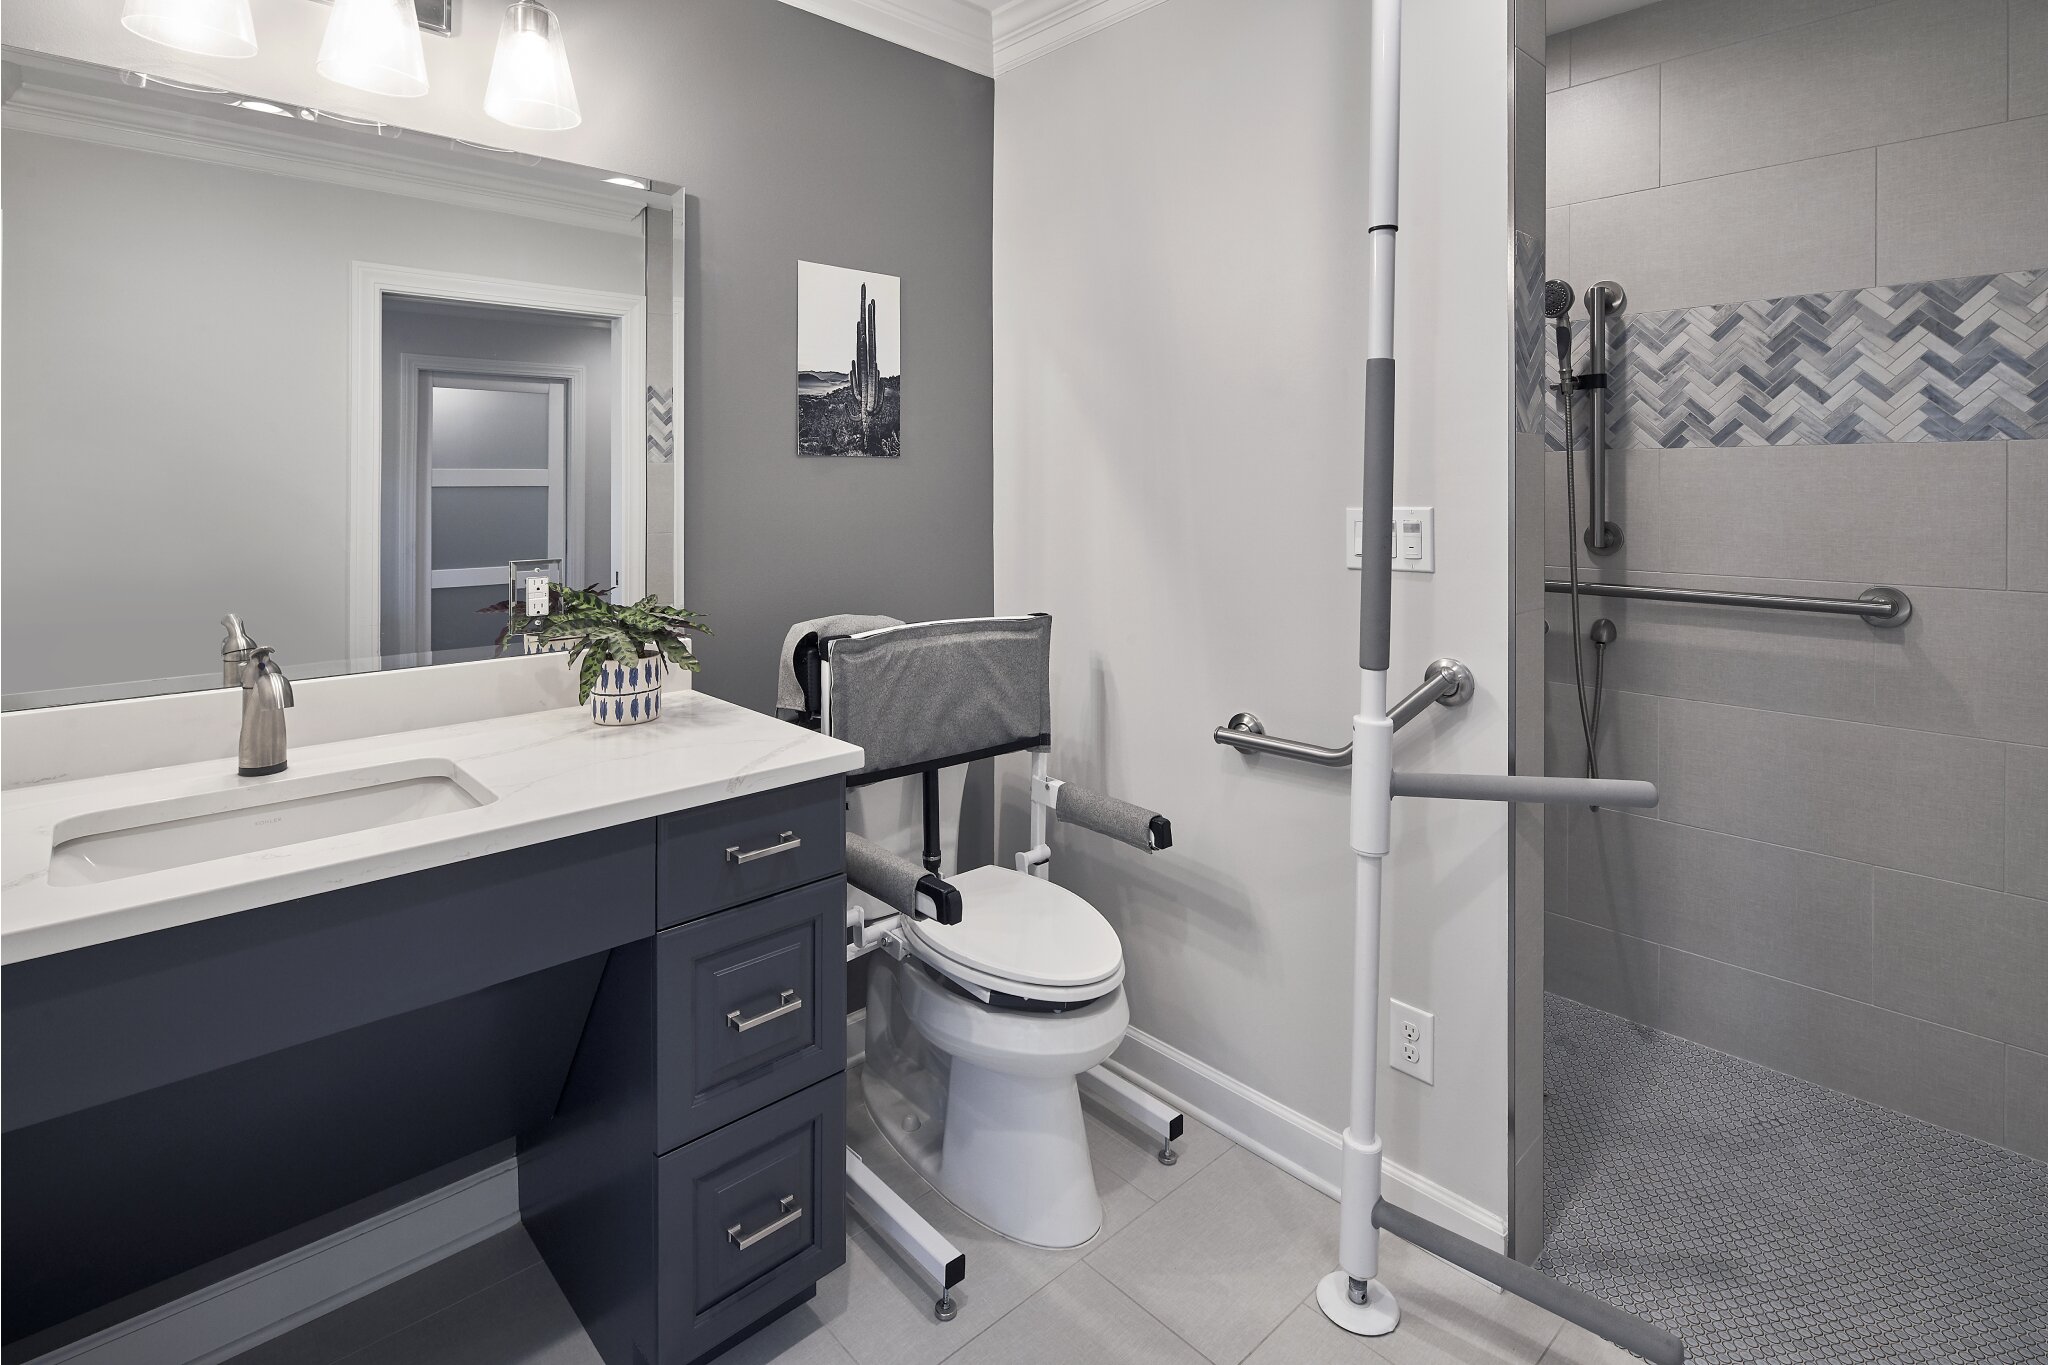 Universal design bathroom renovation with handicap-accessible floating vanity and modified toilet and shower bay